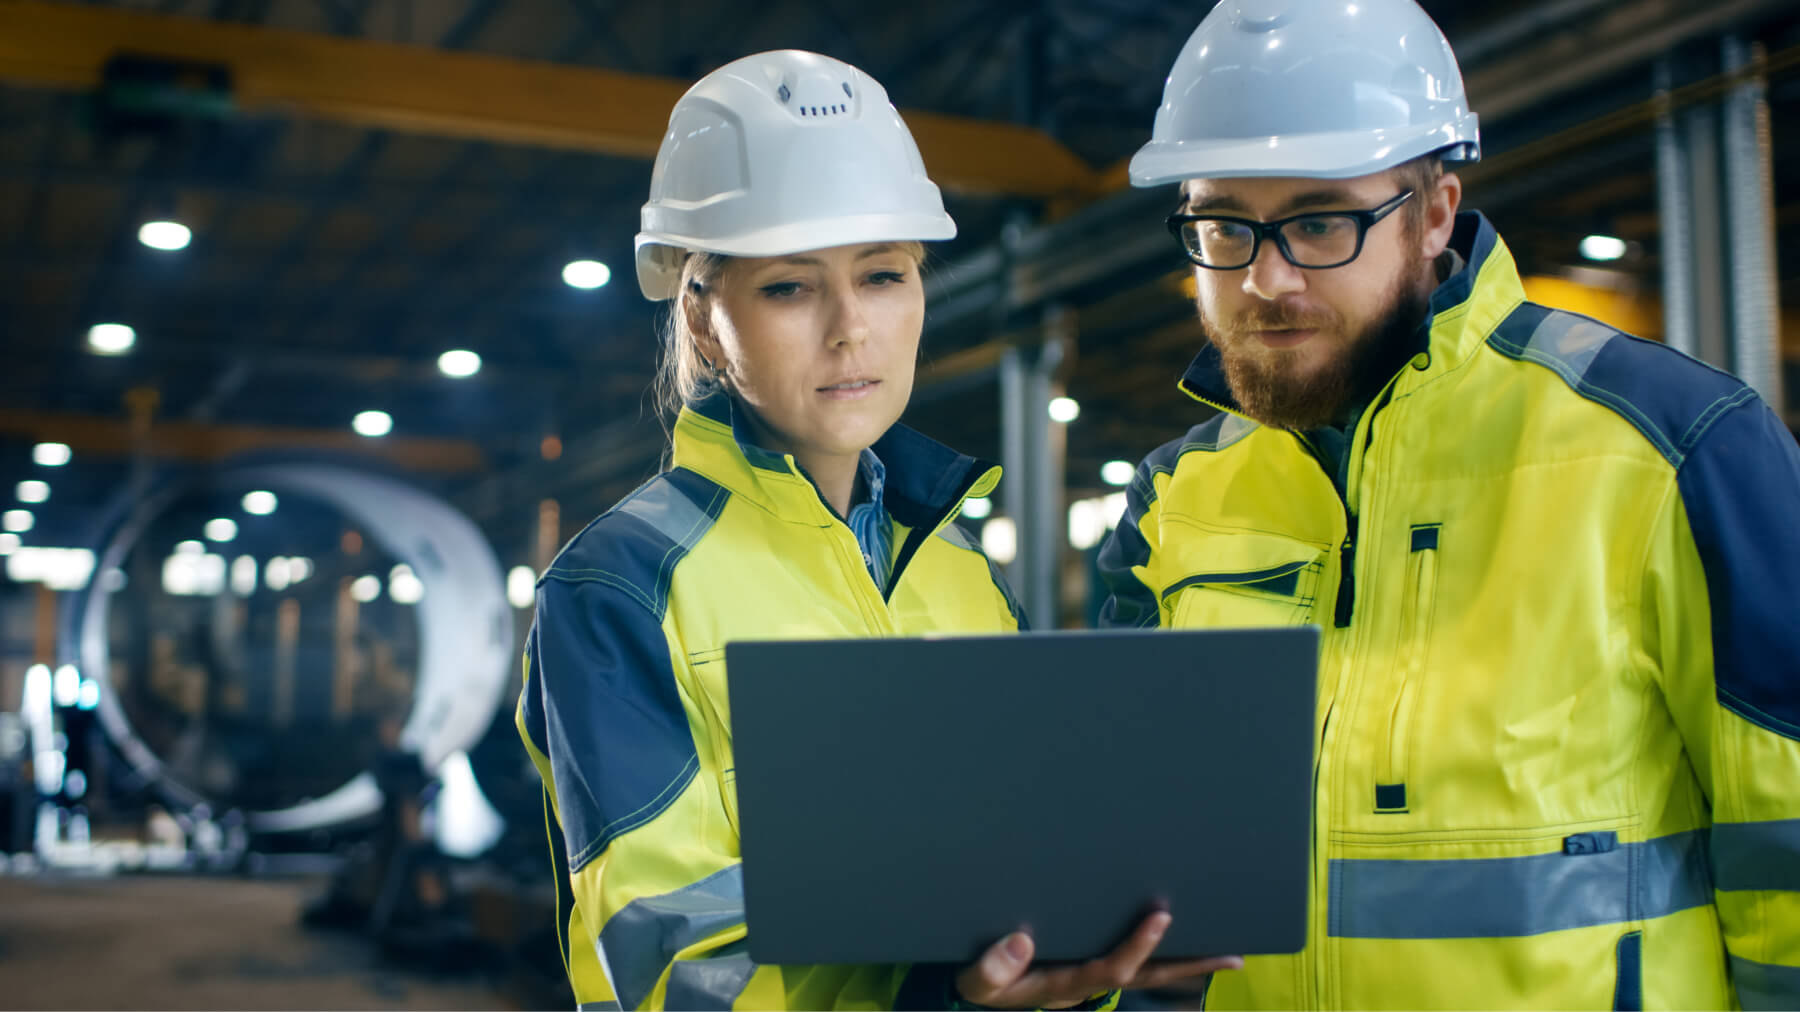 Man and woman in hardhats looking at a laptop